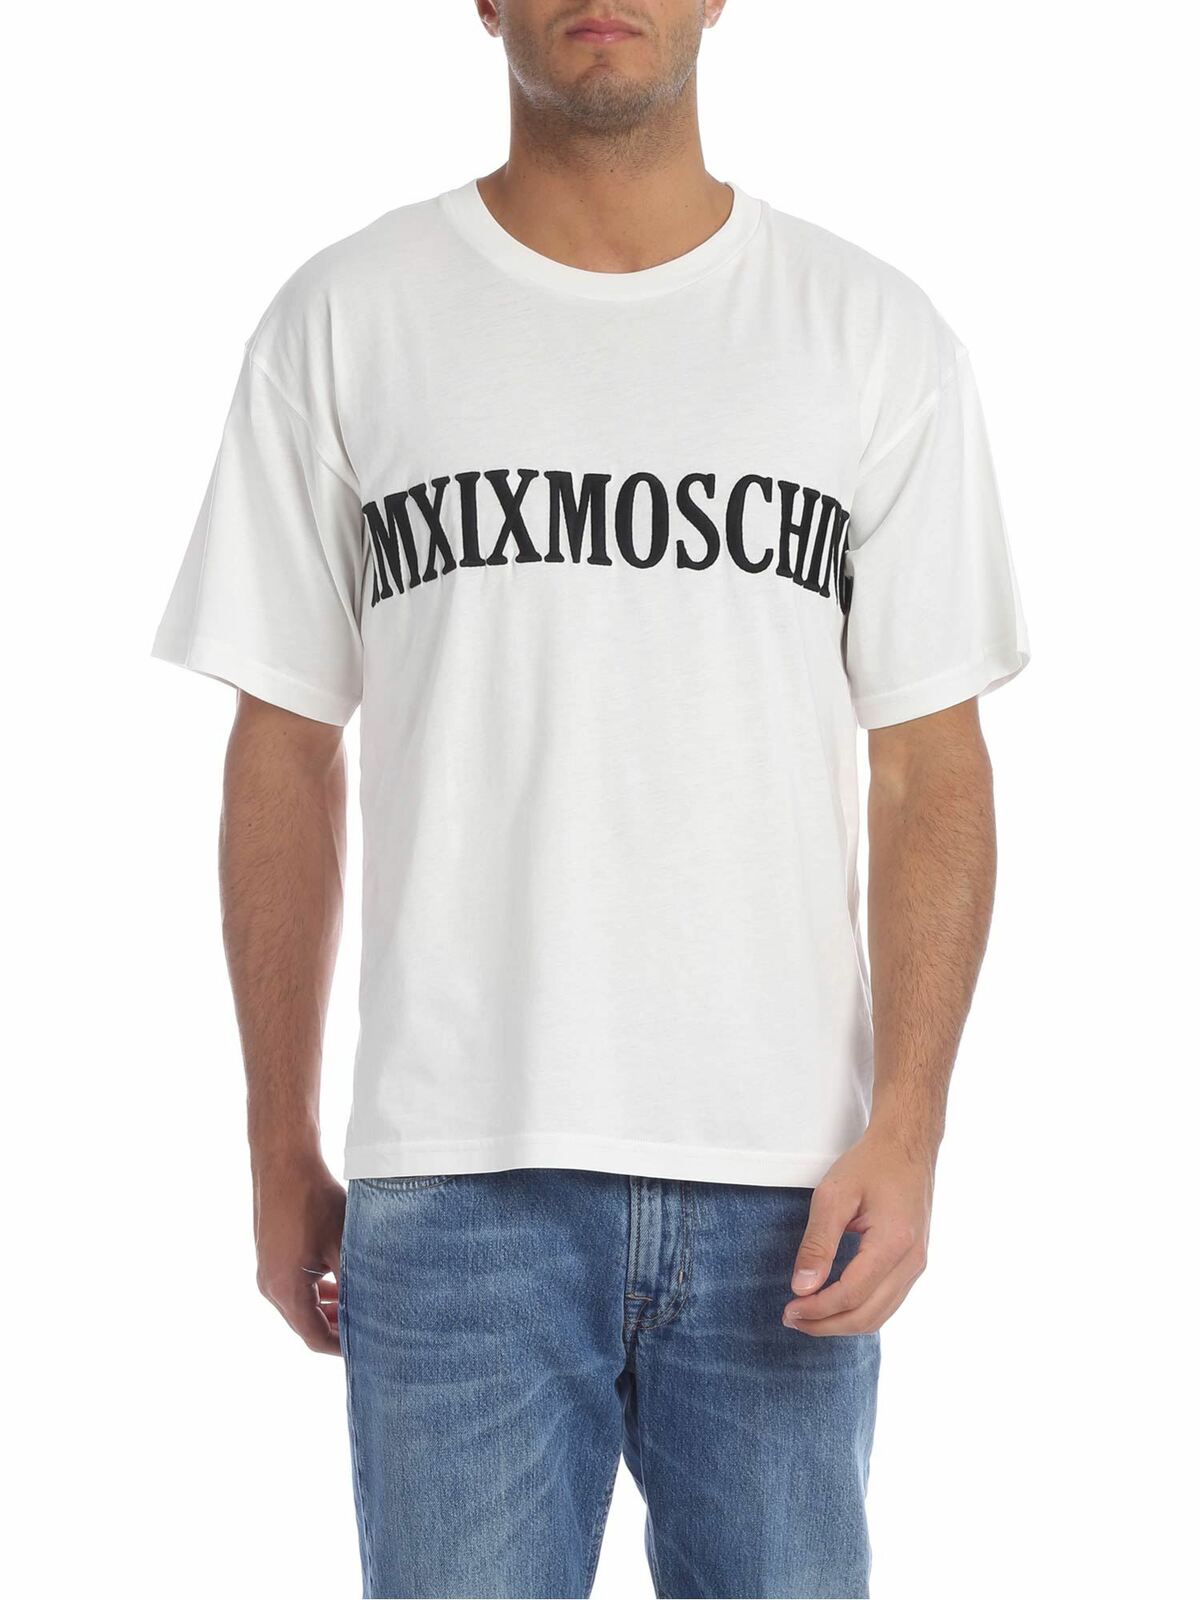 Tシャツ Moschino - Tシャツ - 白 - 070452401002 | THEBS